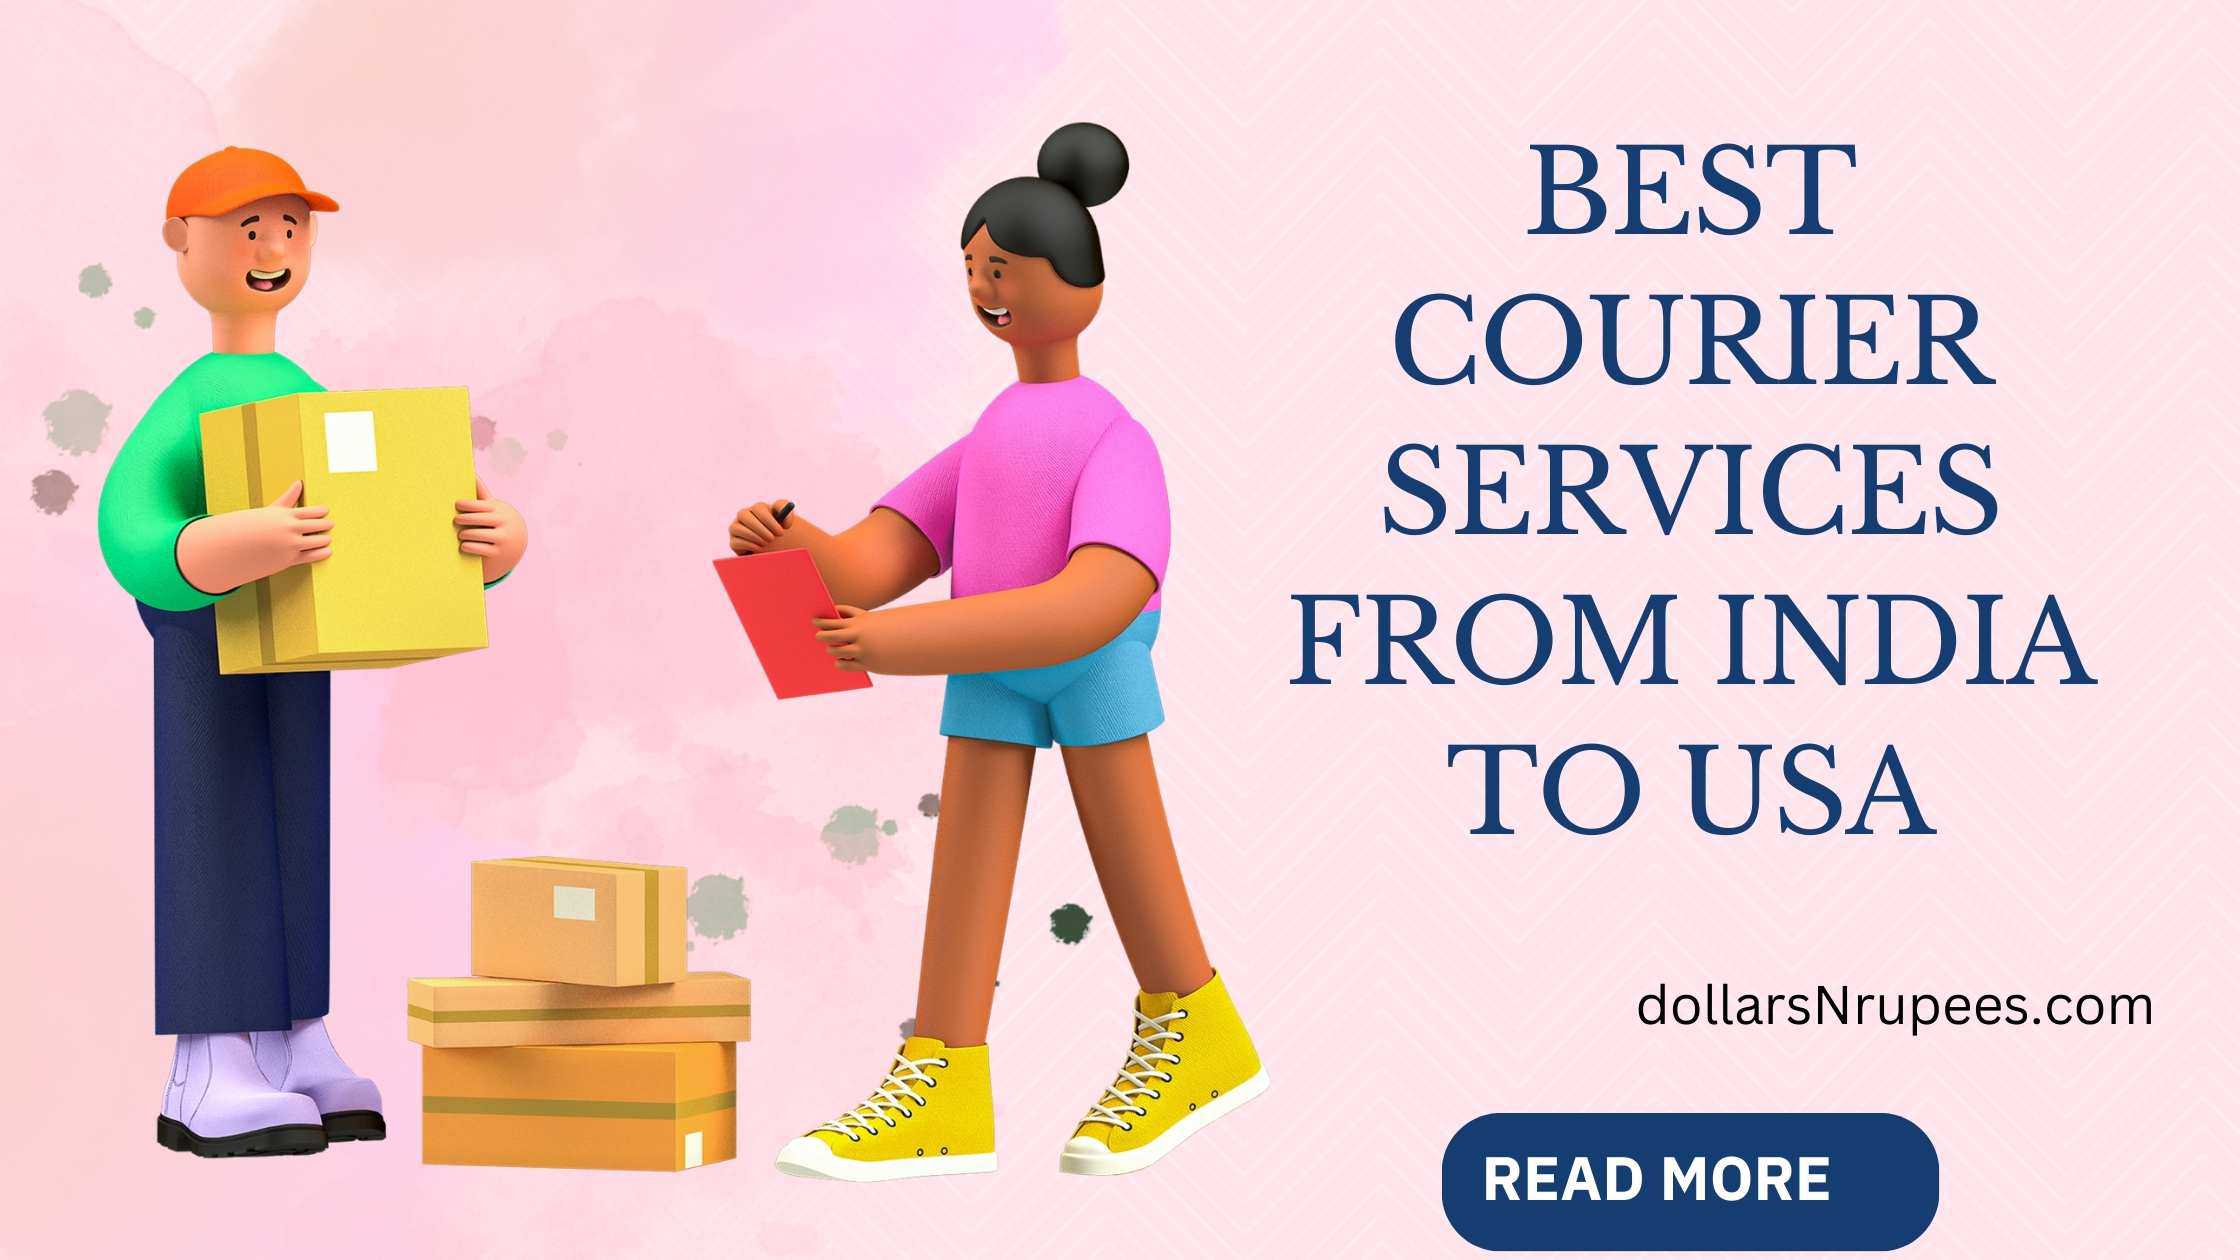 Best Courier Services from India to USA